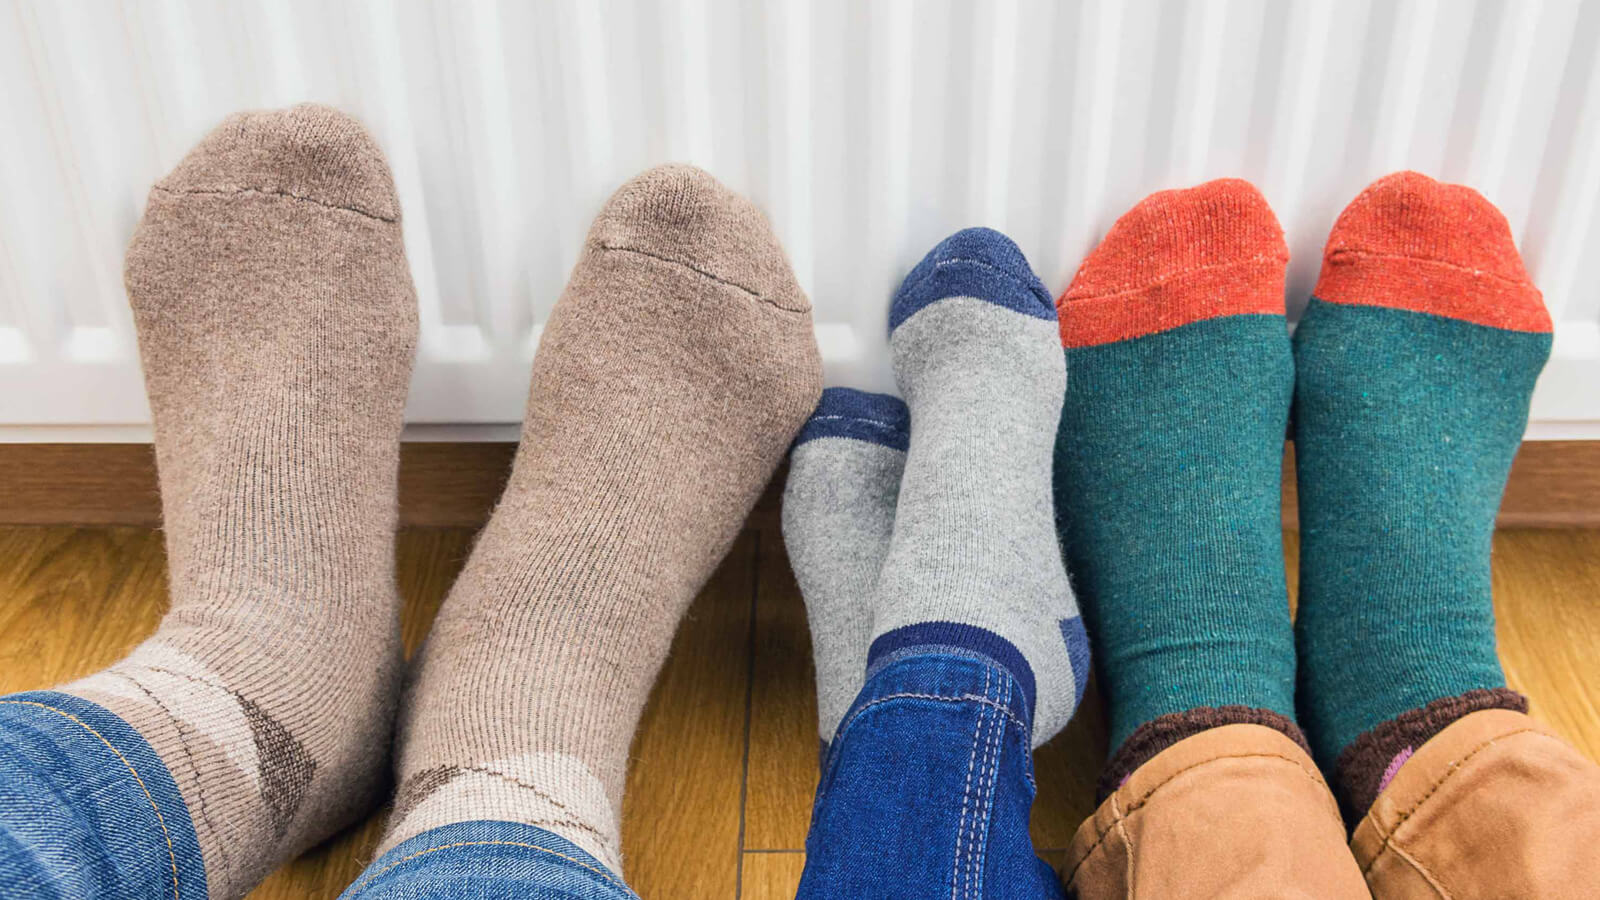 Low carbon heating - warming feet on a radiator